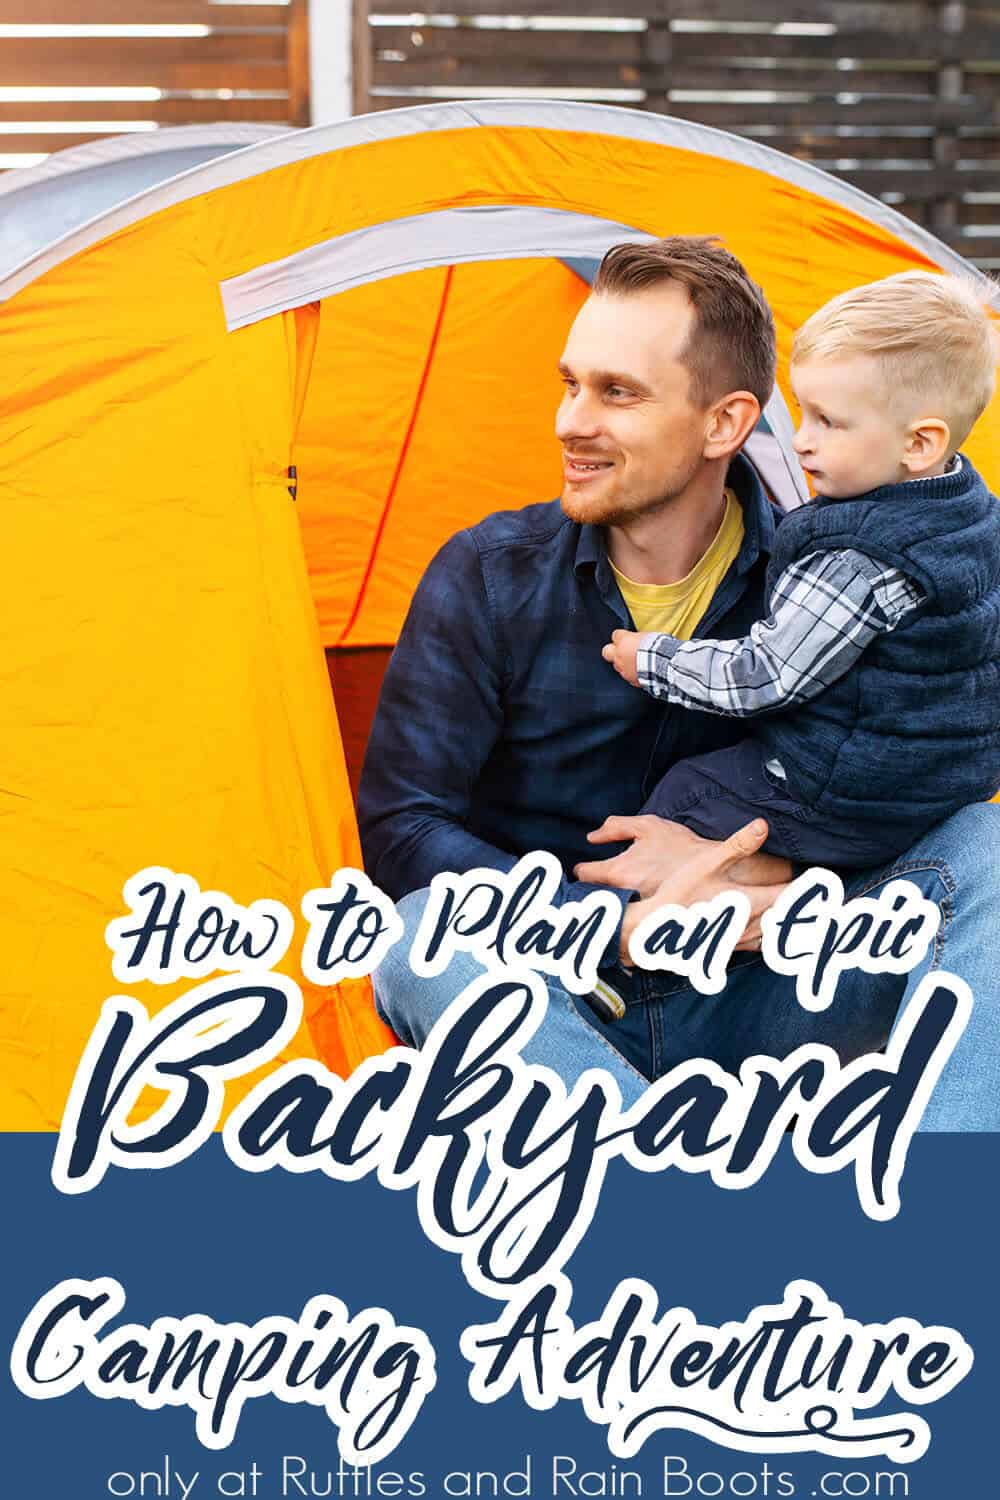 backyard camping tips with text which reads how to plan an epic backyard camping adventure